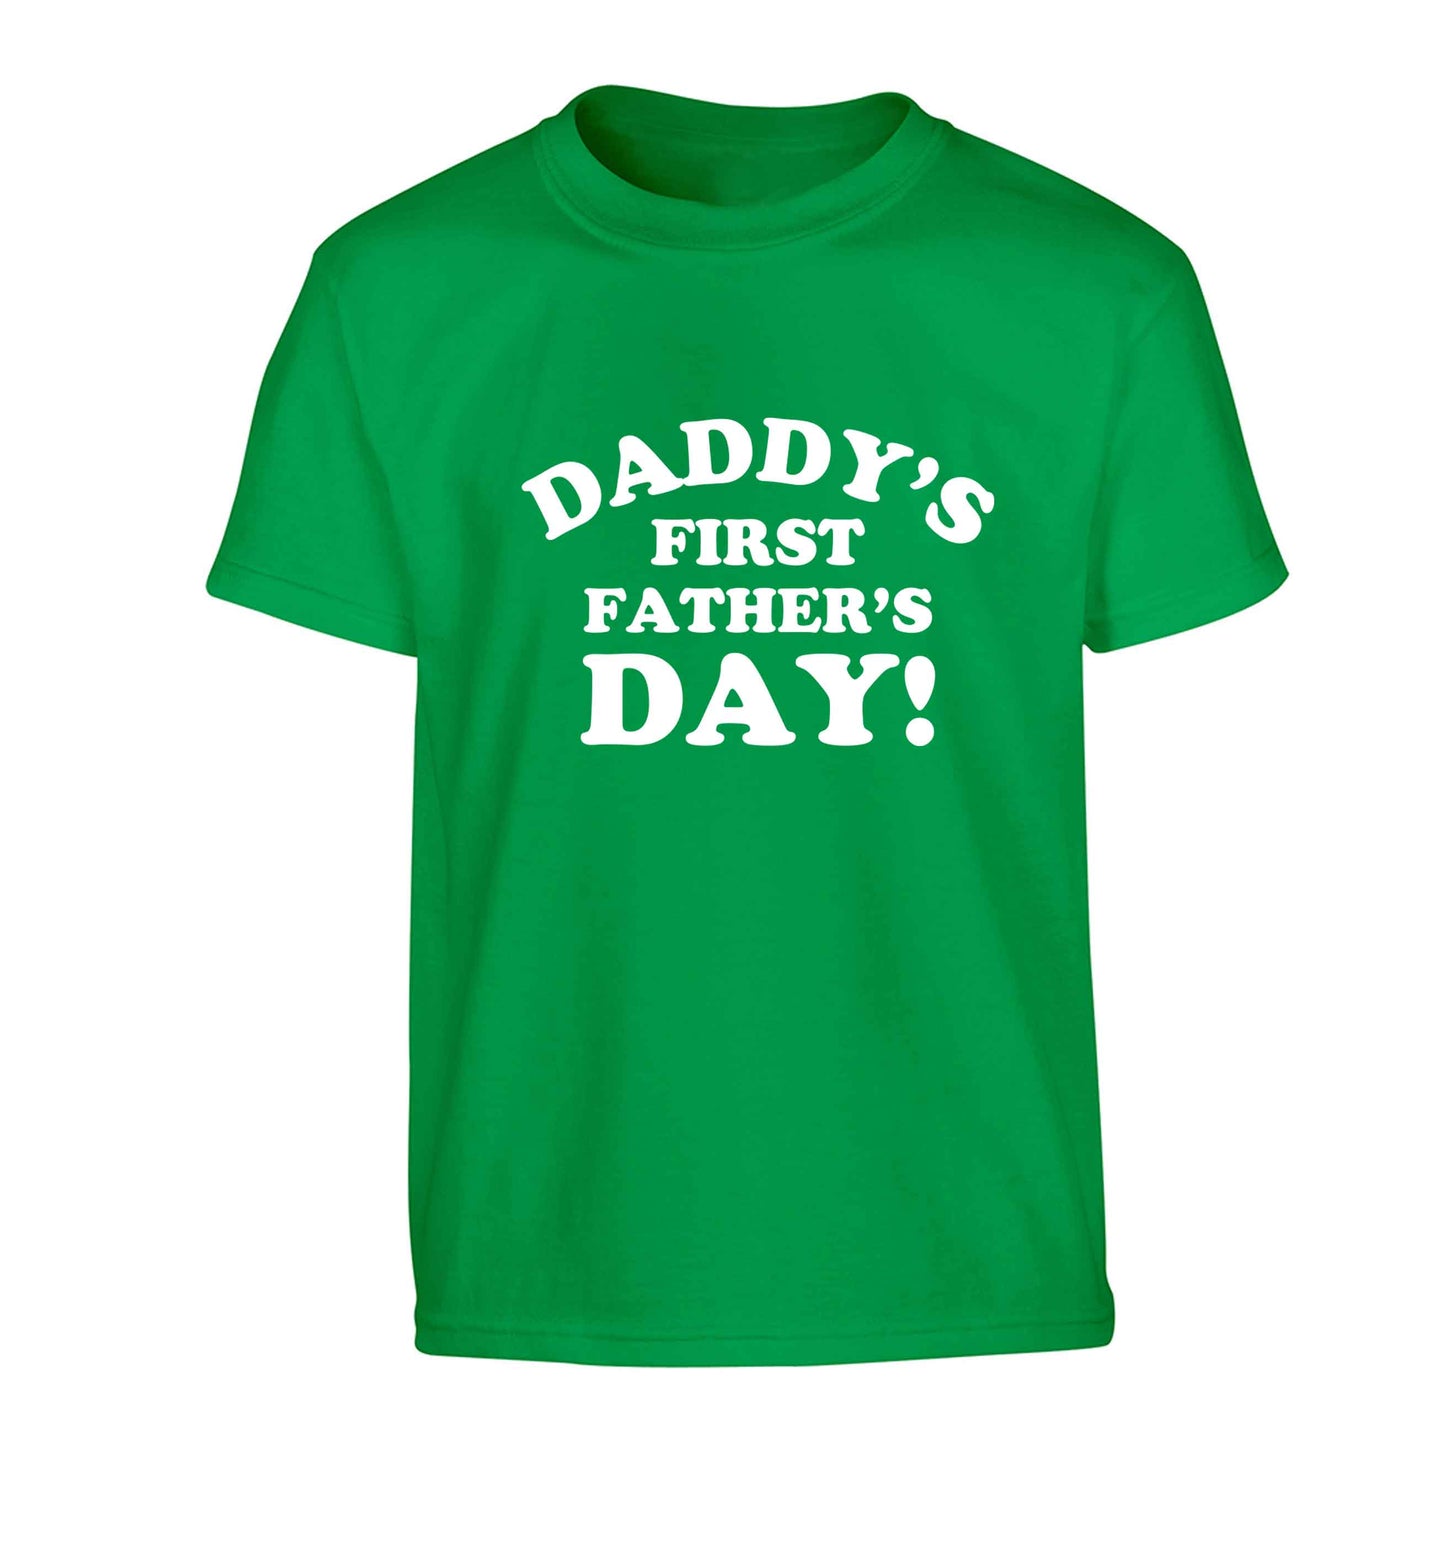 Daddy's first father's day Children's green Tshirt 12-13 Years